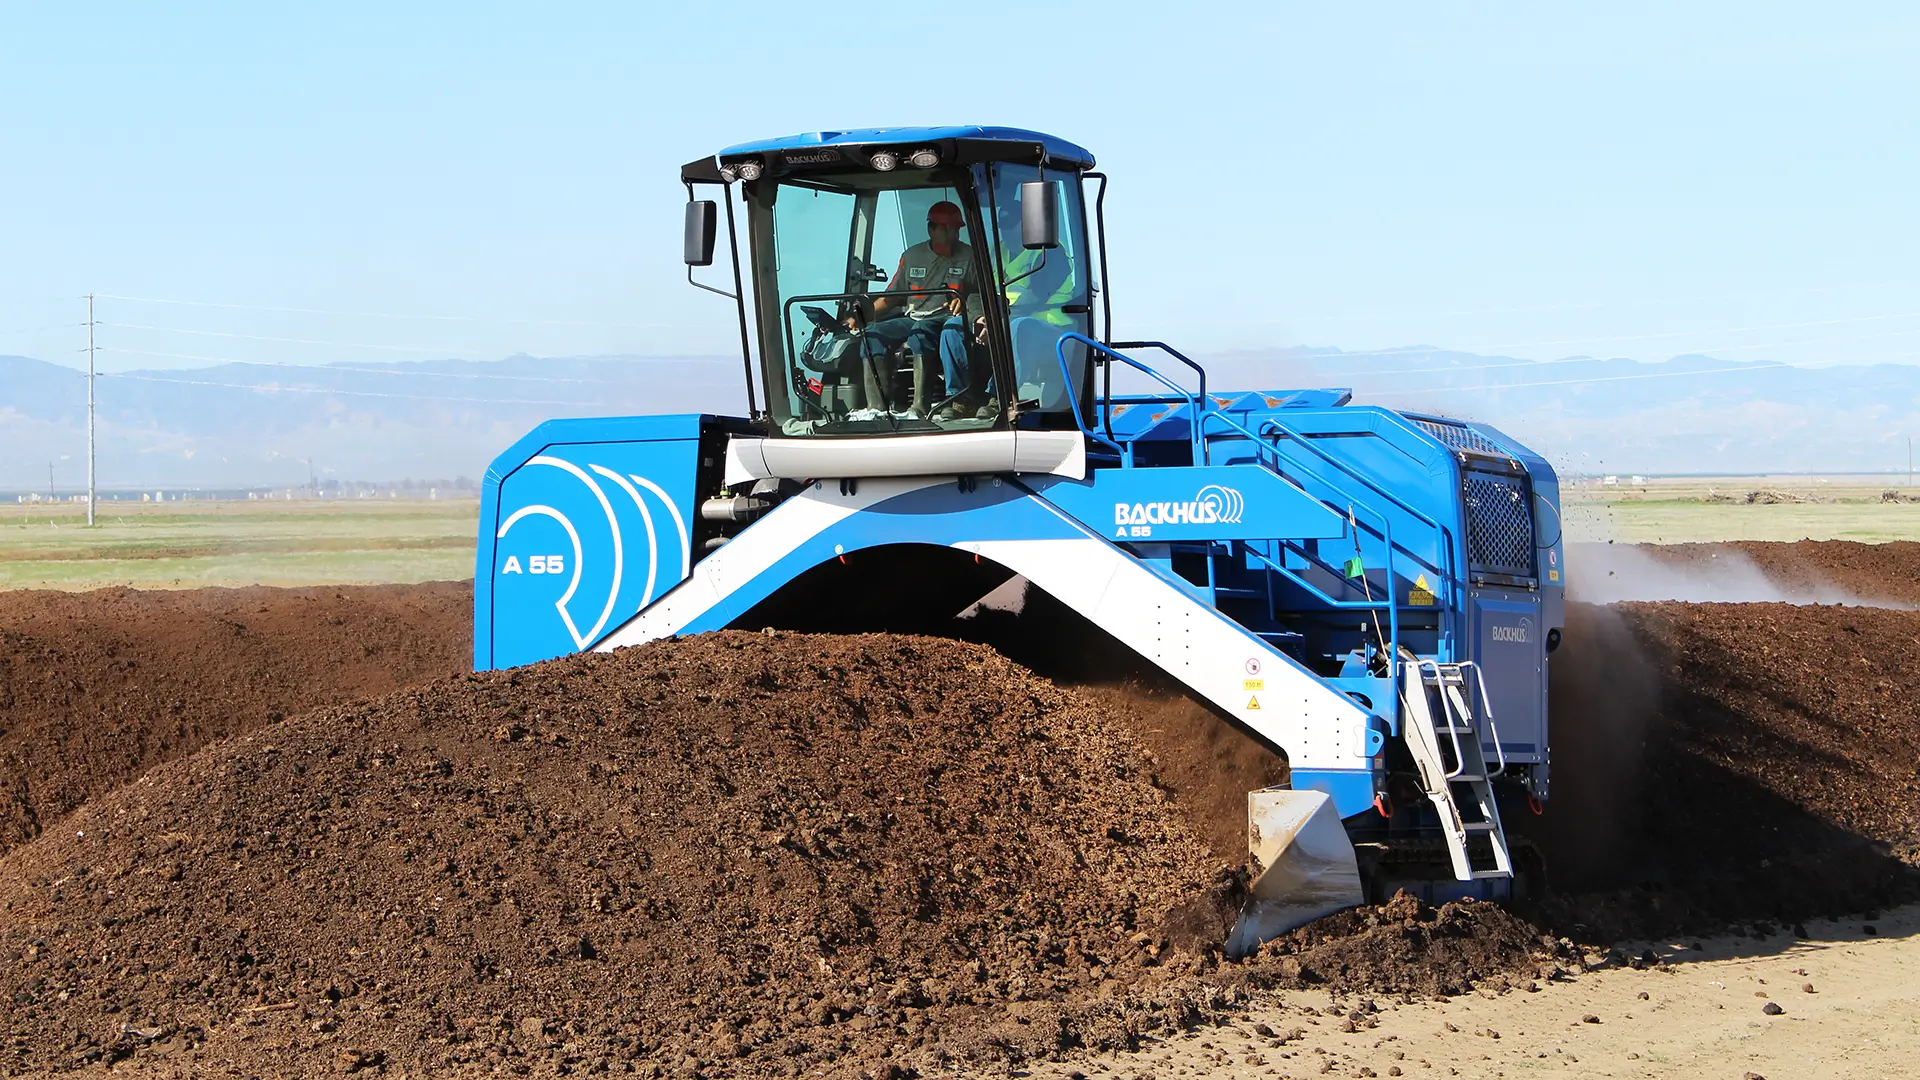 The operator sits in a comfortable enclosed cab high atop BACKHUS compost turners to see what they are doing.